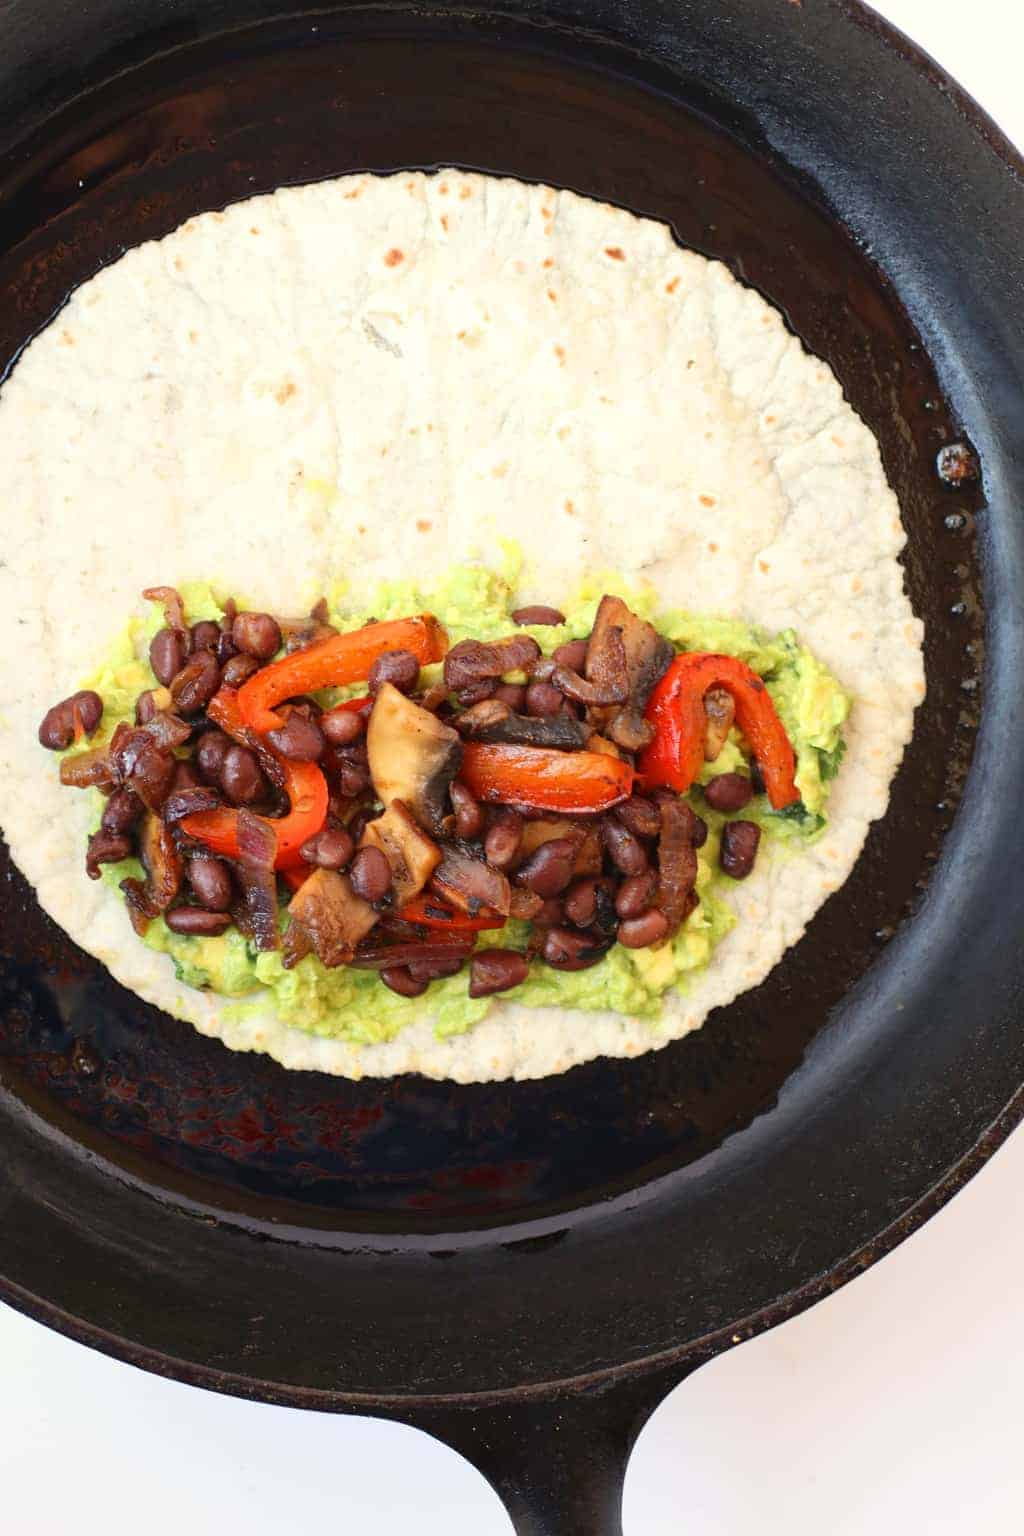 Tortilla with beans and veggies in a cast iron skillet